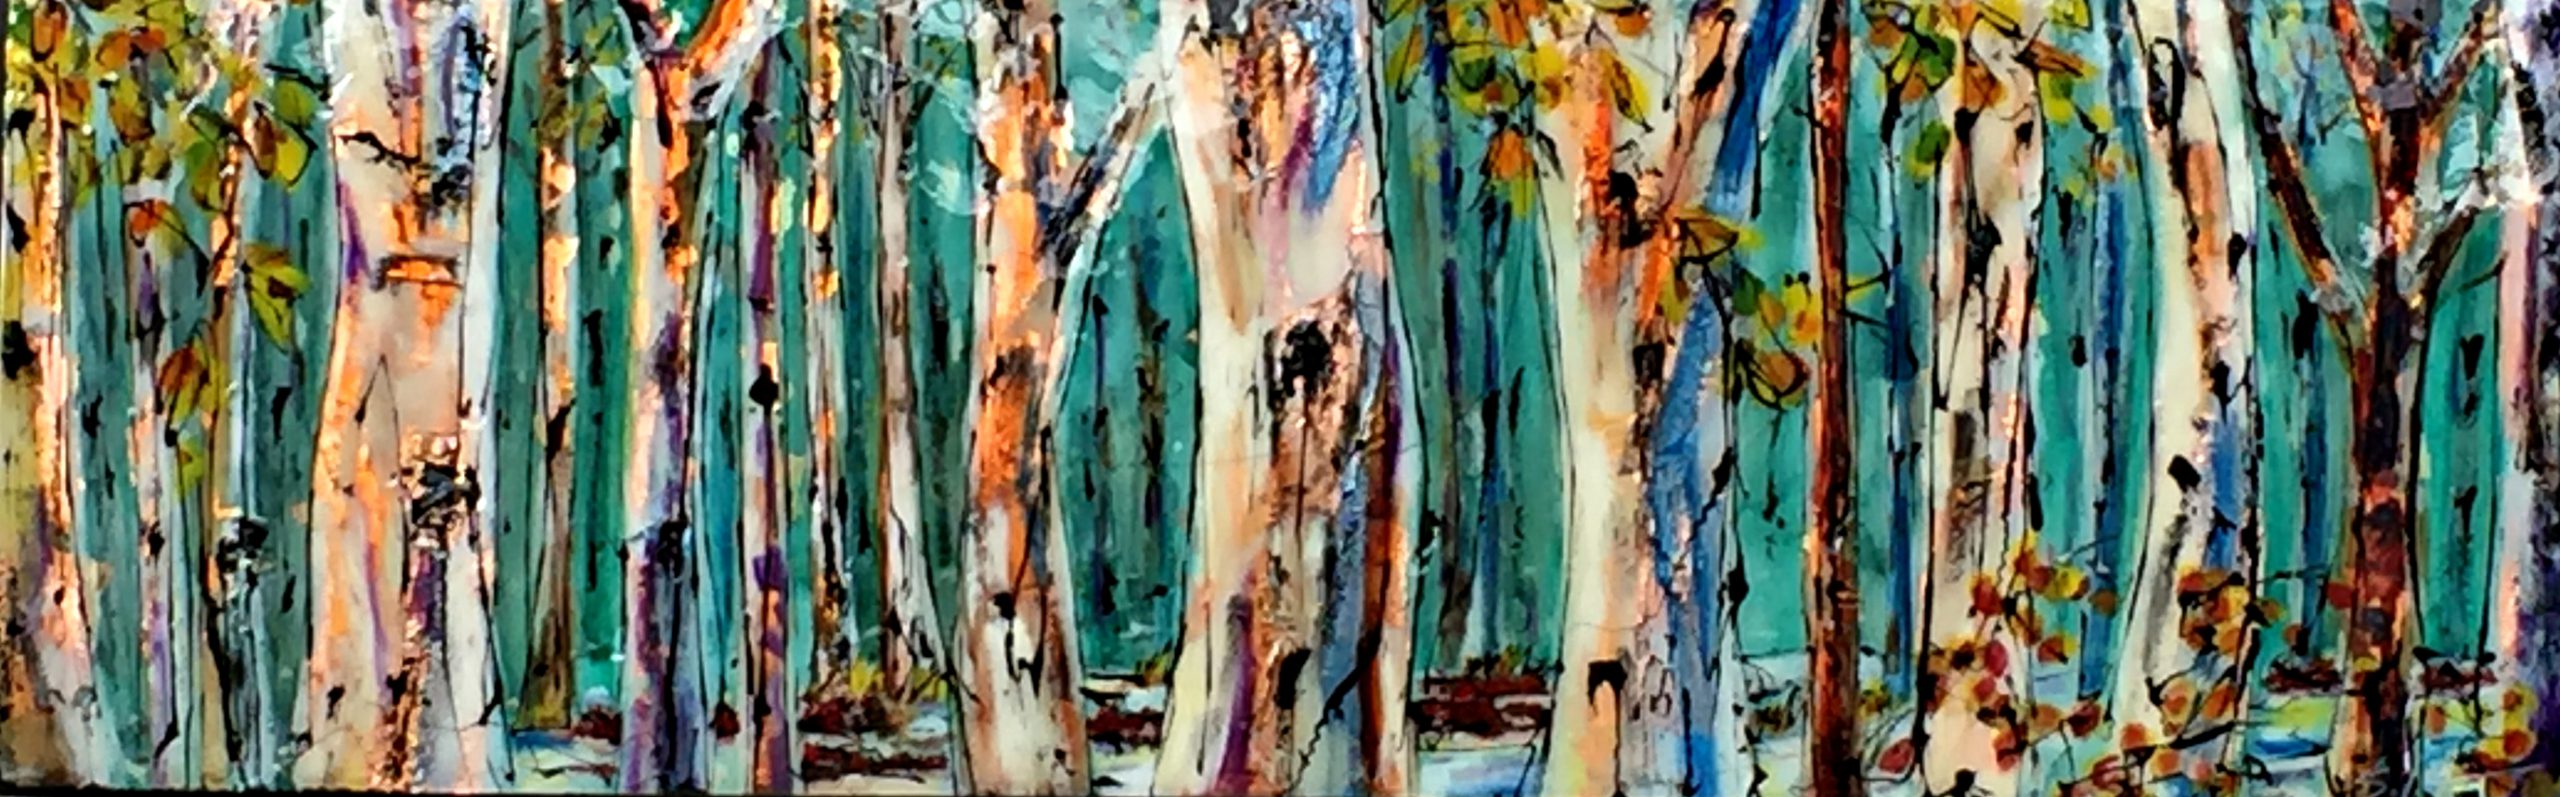 Stay Quiet, mixed media treescape painting by David Zimmerman | Effusion Art Gallery + Cast Glass Studio, Invermere BC